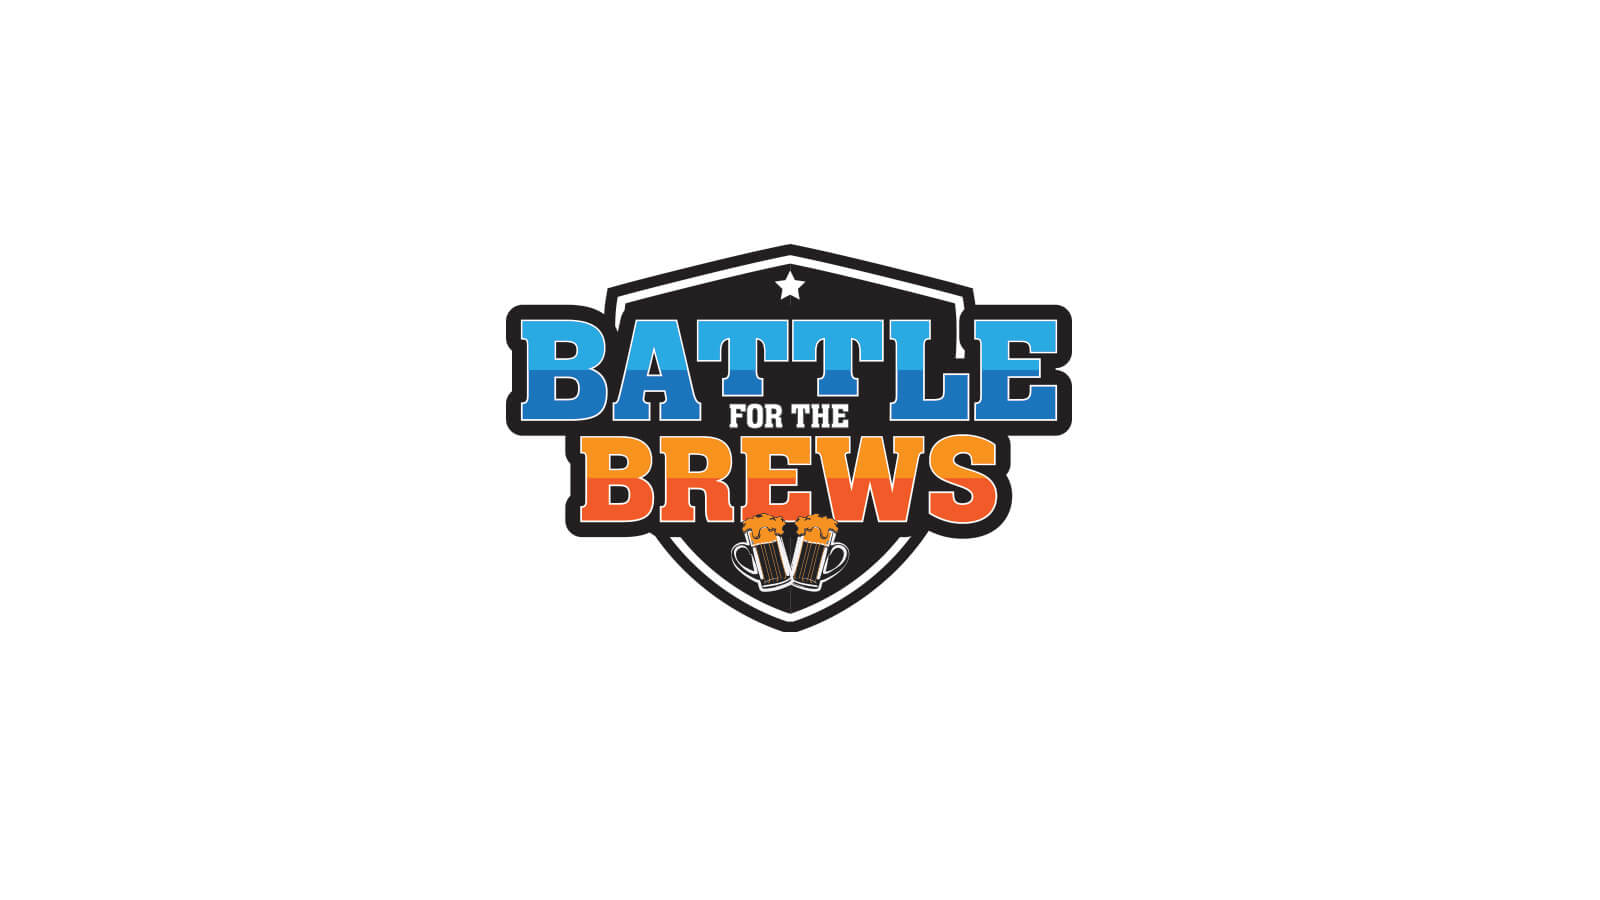 Battle for the Brews